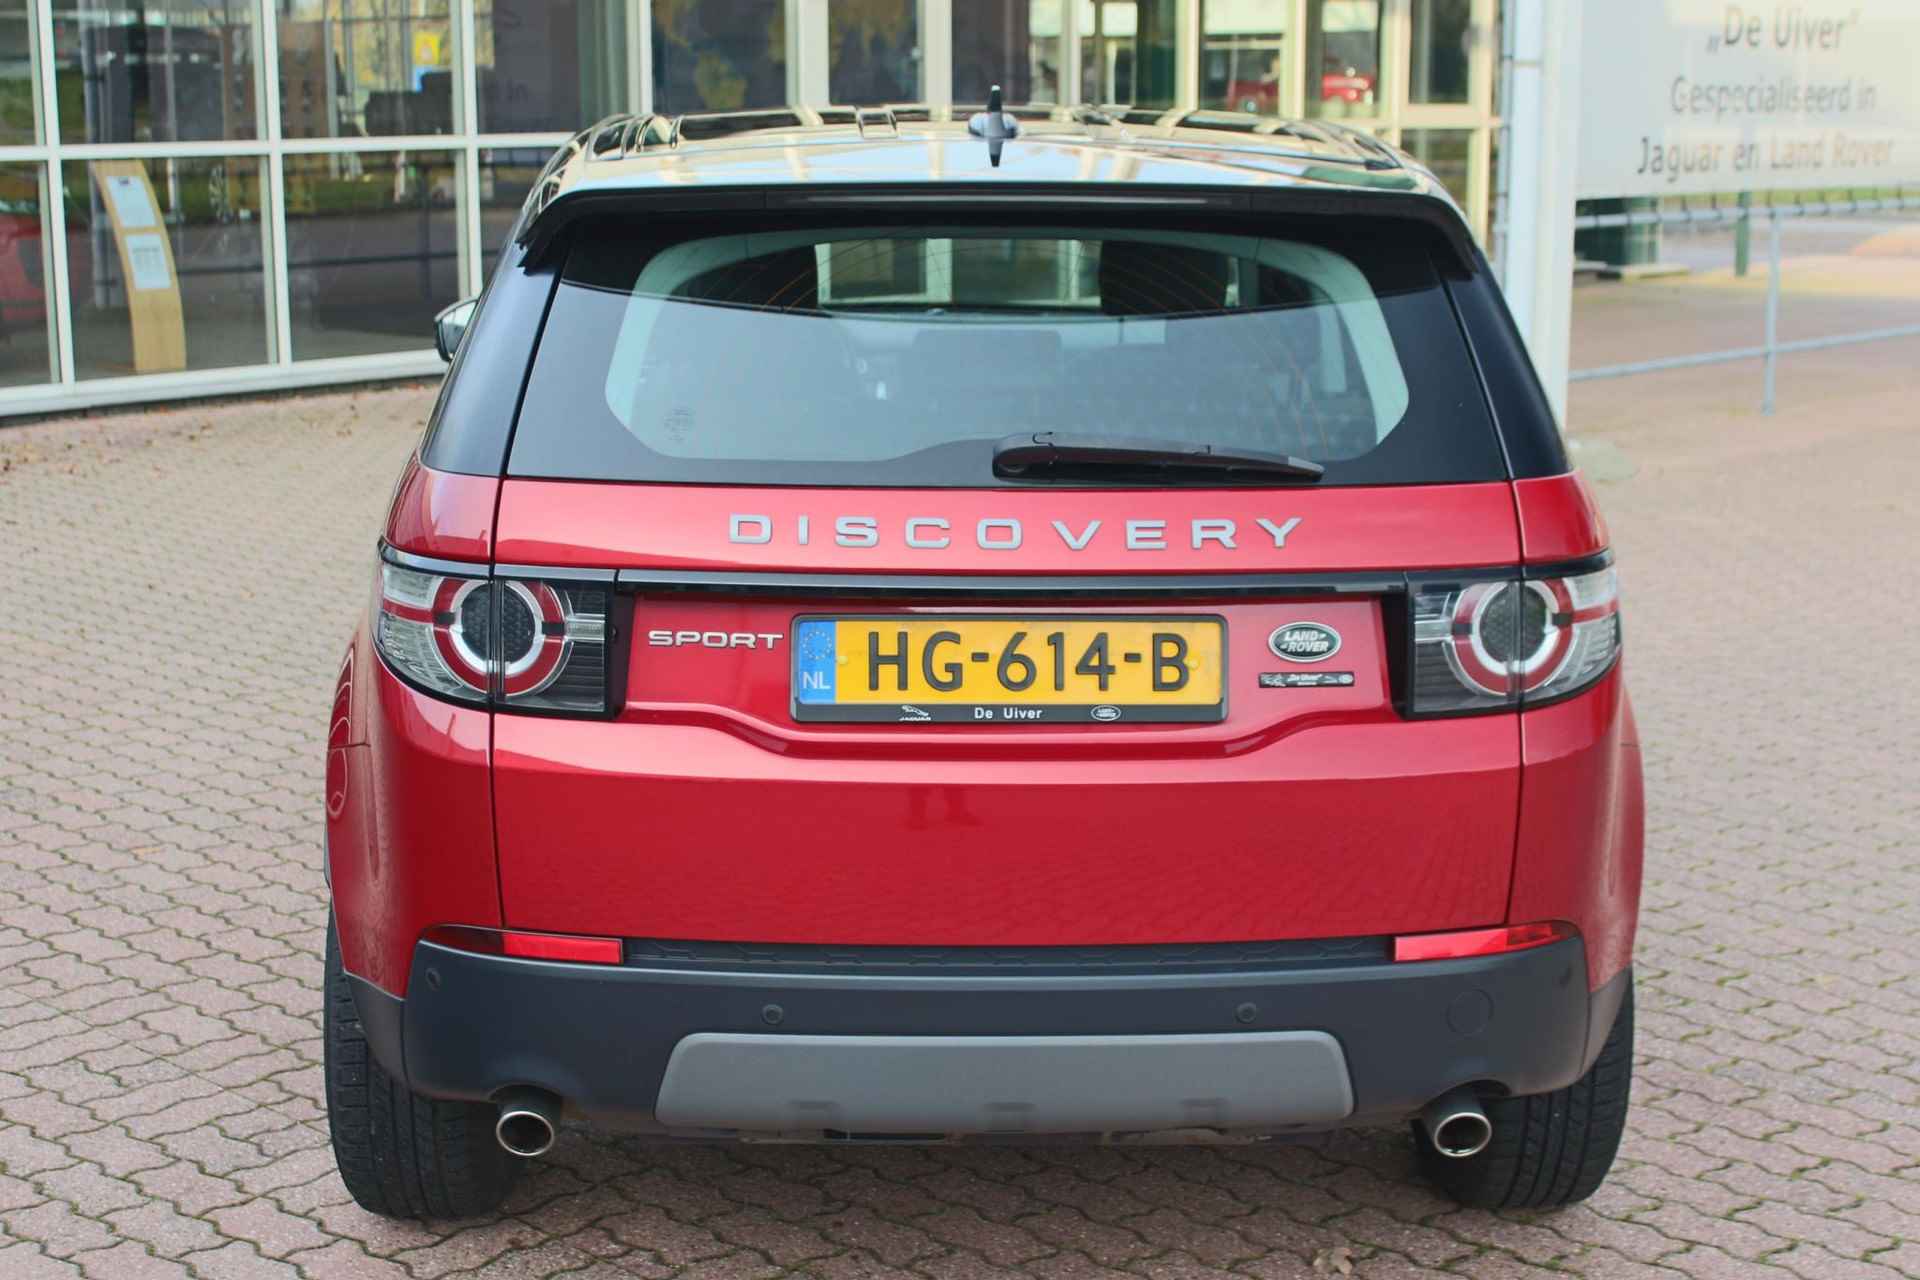 Land Rover Discovery Sport 2.0 TD4 SE 150 pk automaat 1e eigenaar/ DAB+/ Vision Assist Pack/ AHBA/ Xenon + Led/ PDC V+A/ Cold Climate Pack - 14/59